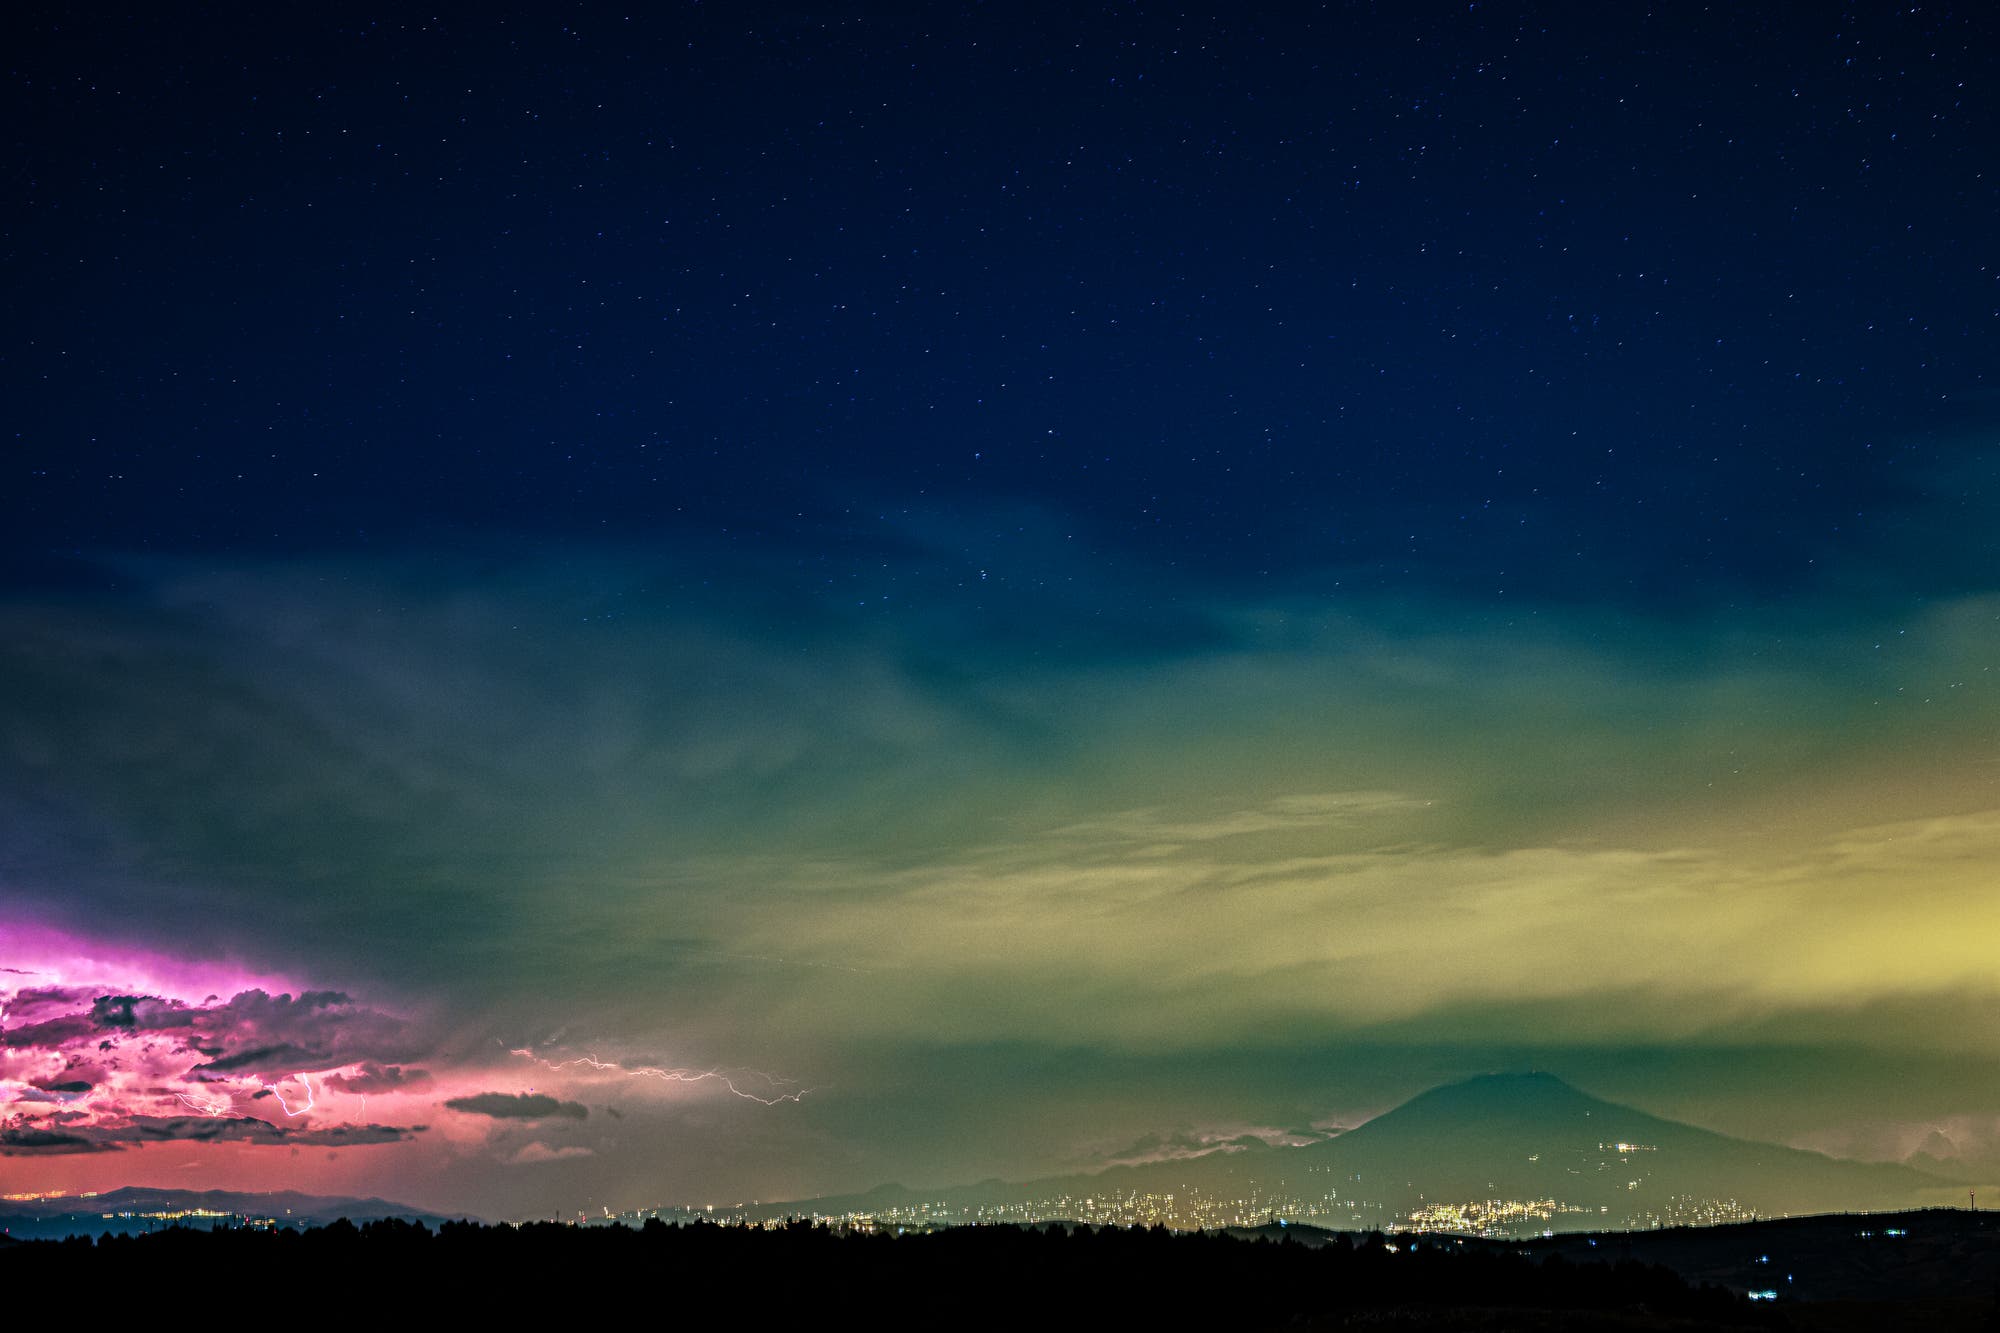 The Stars over the Storm & the Mount Etna - Sicily